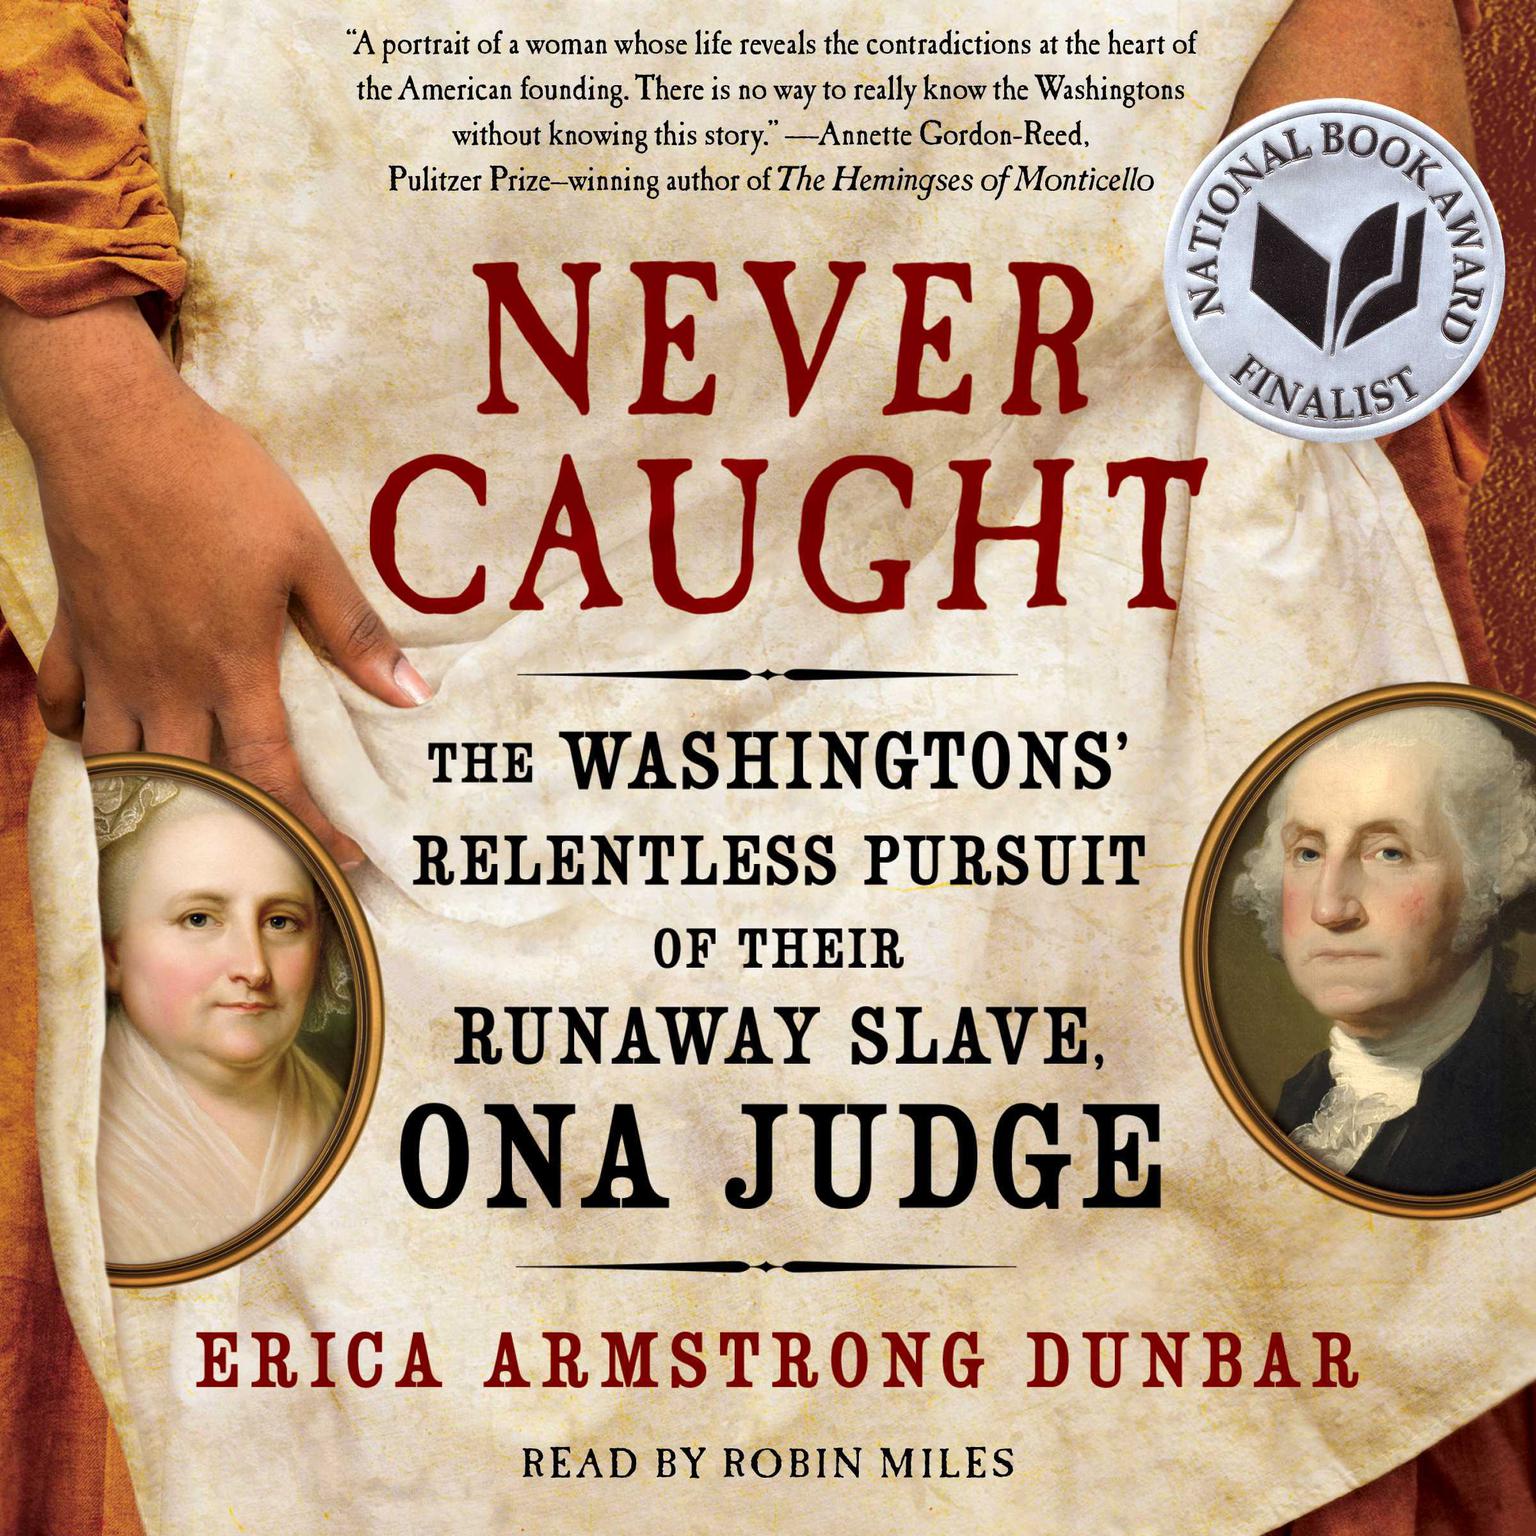 Never Caught: The Washingtons’ Relentless Pursuit of Their Runaway Slave, Ona Judge Audiobook, by Erica Armstrong Dunbar